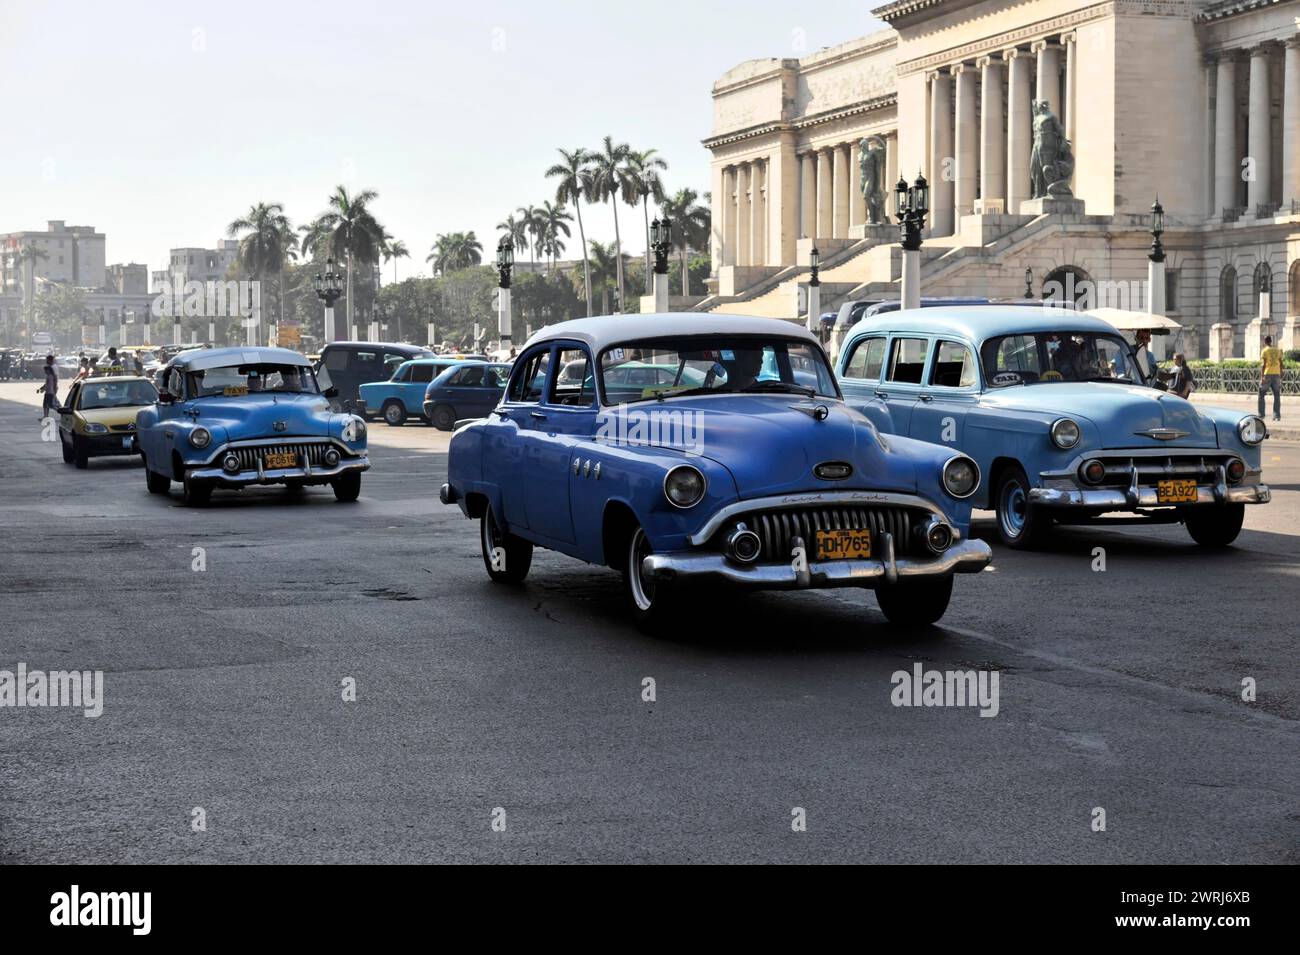 Row of vintage cars driving on a wide city street, Havana, Cuba, Central America Stock Photo